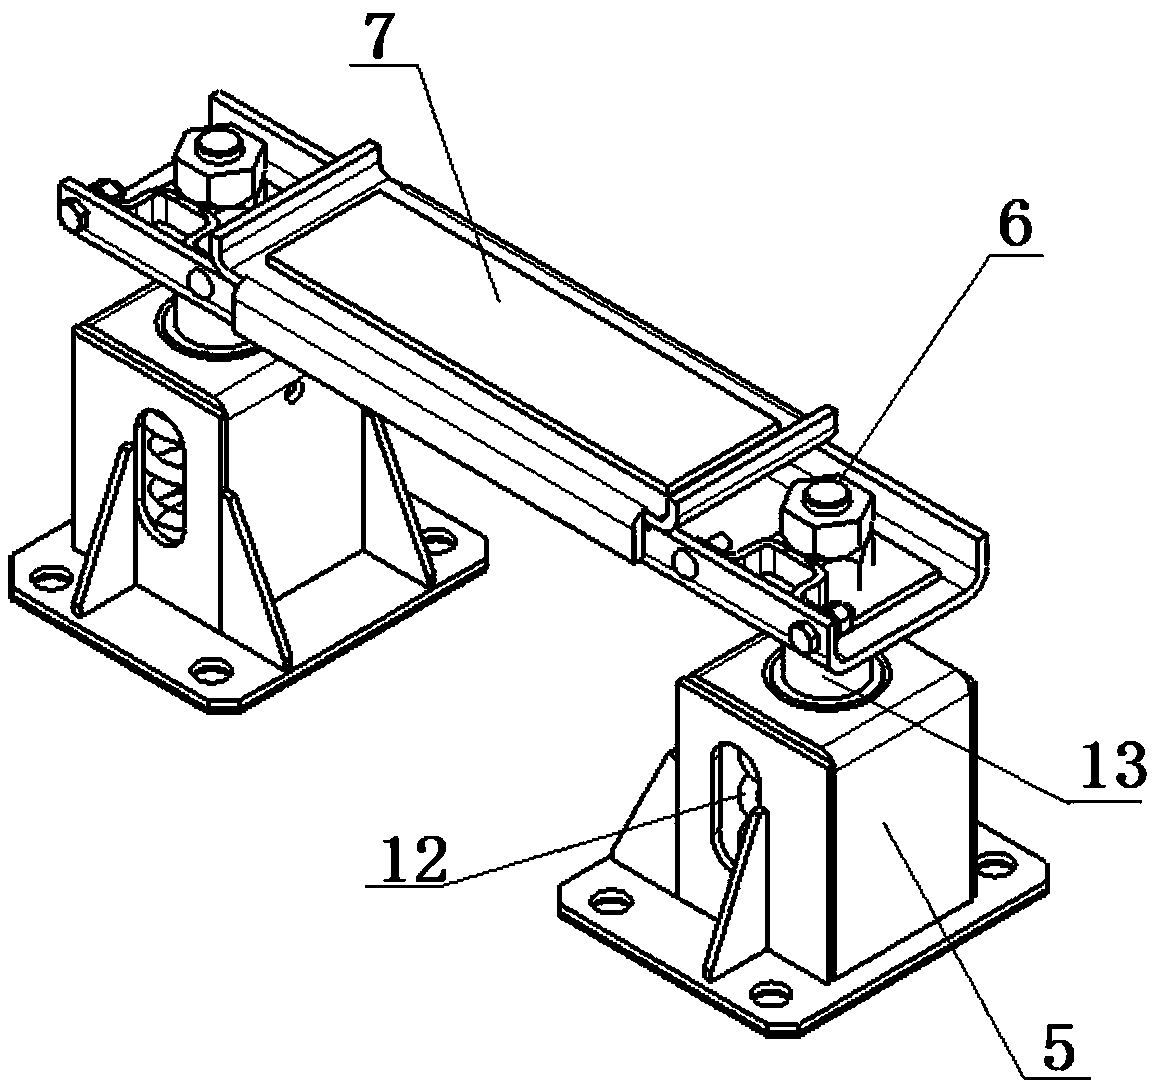 Coupler mounting structure